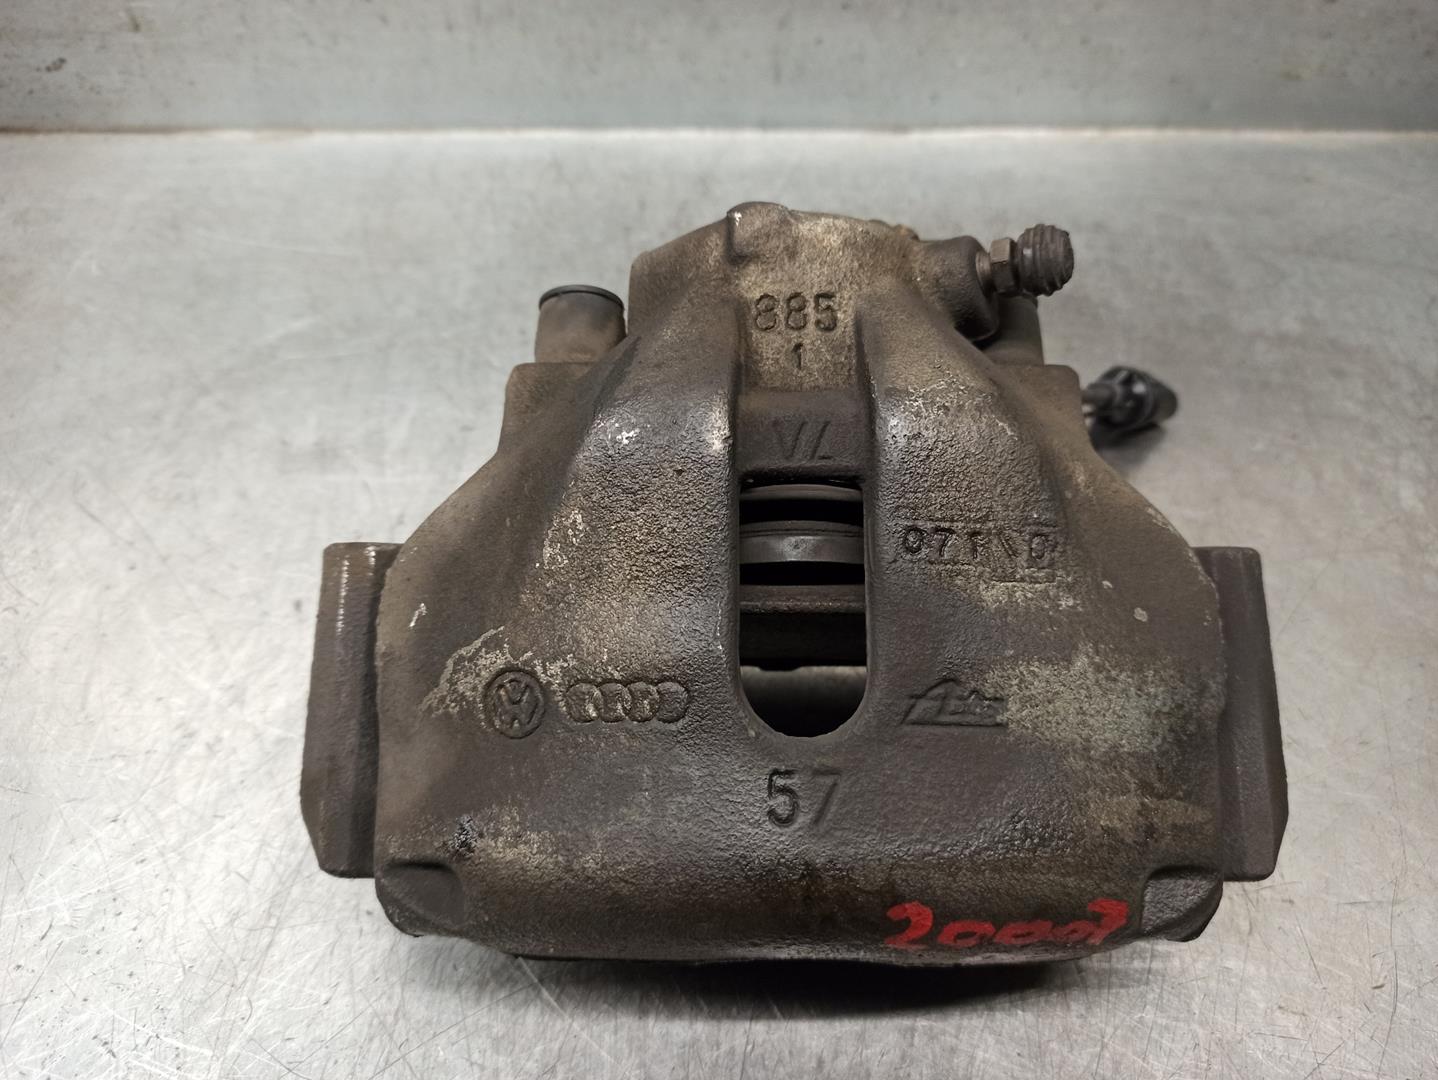 SEAT Exeo 1 generation (2009-2012) Front Right Brake Caliper 8E0615124A, ATE 23757851